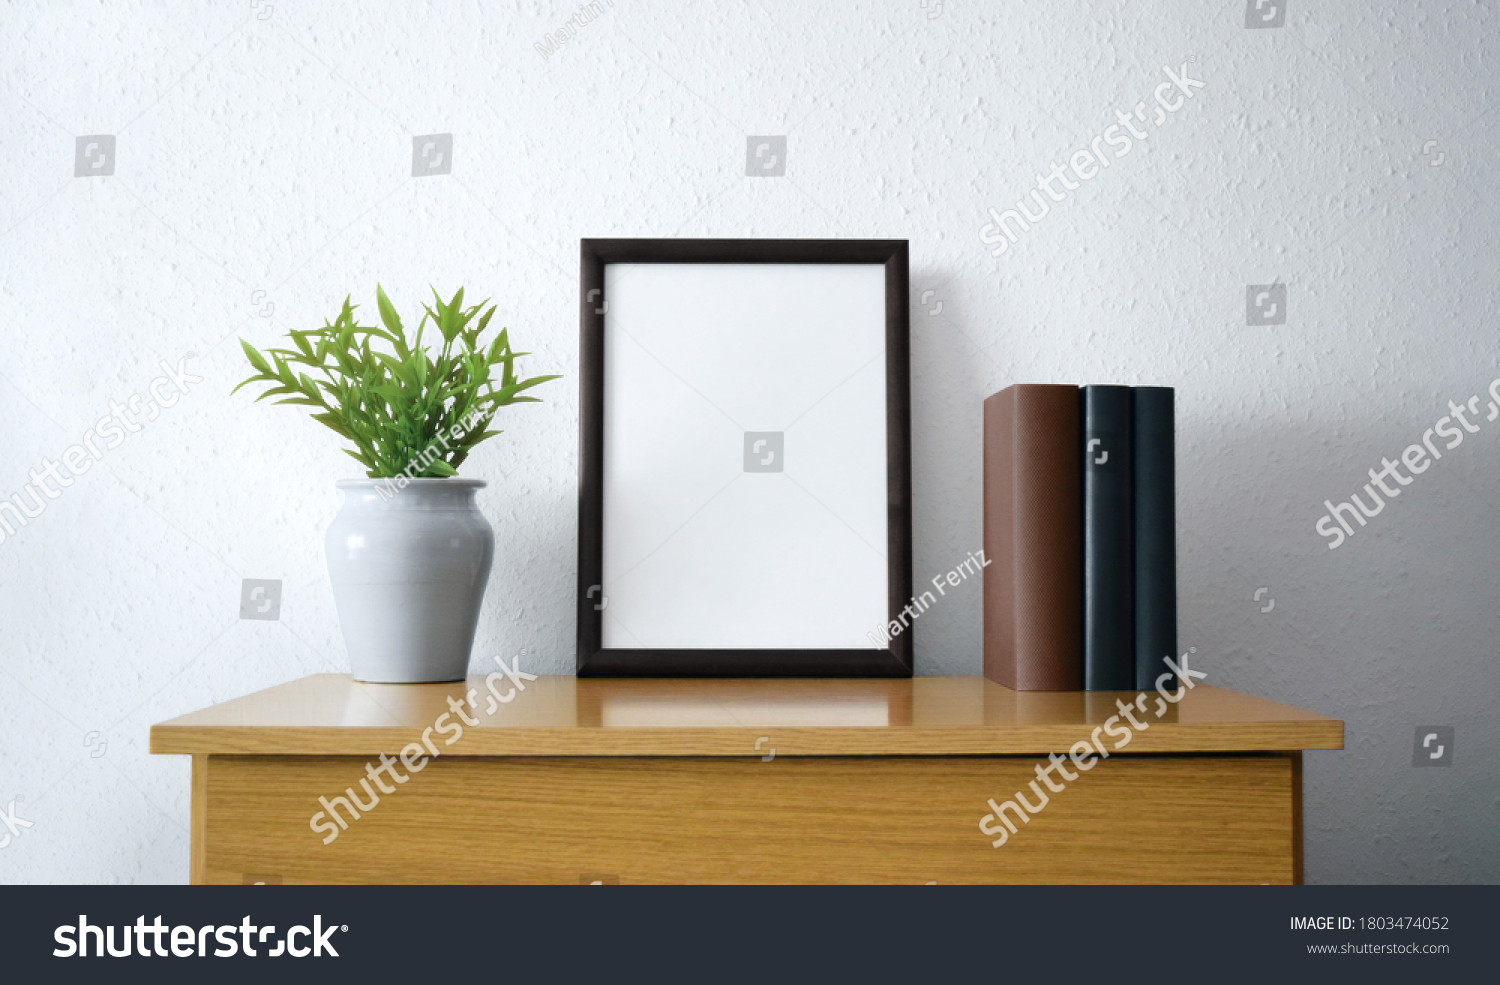 Black frame with plant and books over wooden furniture #1803474052